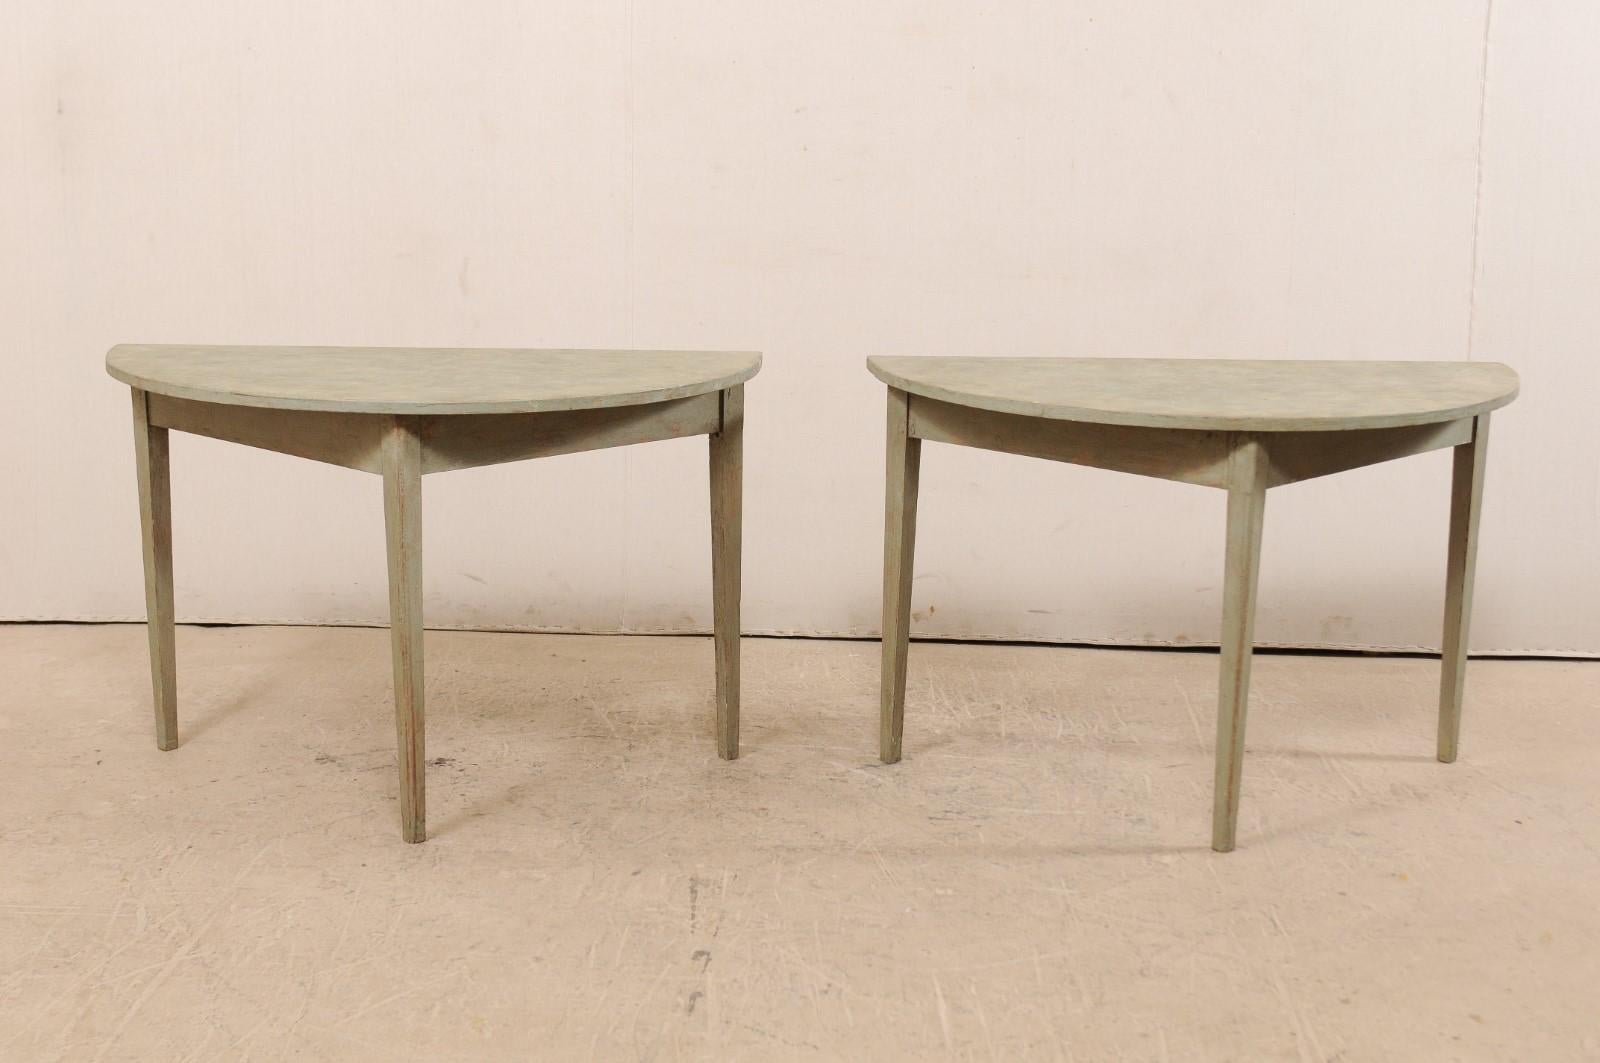 Carved Pair of 19th Century Swedish Painted Wood Demilune Tables, circa 1880